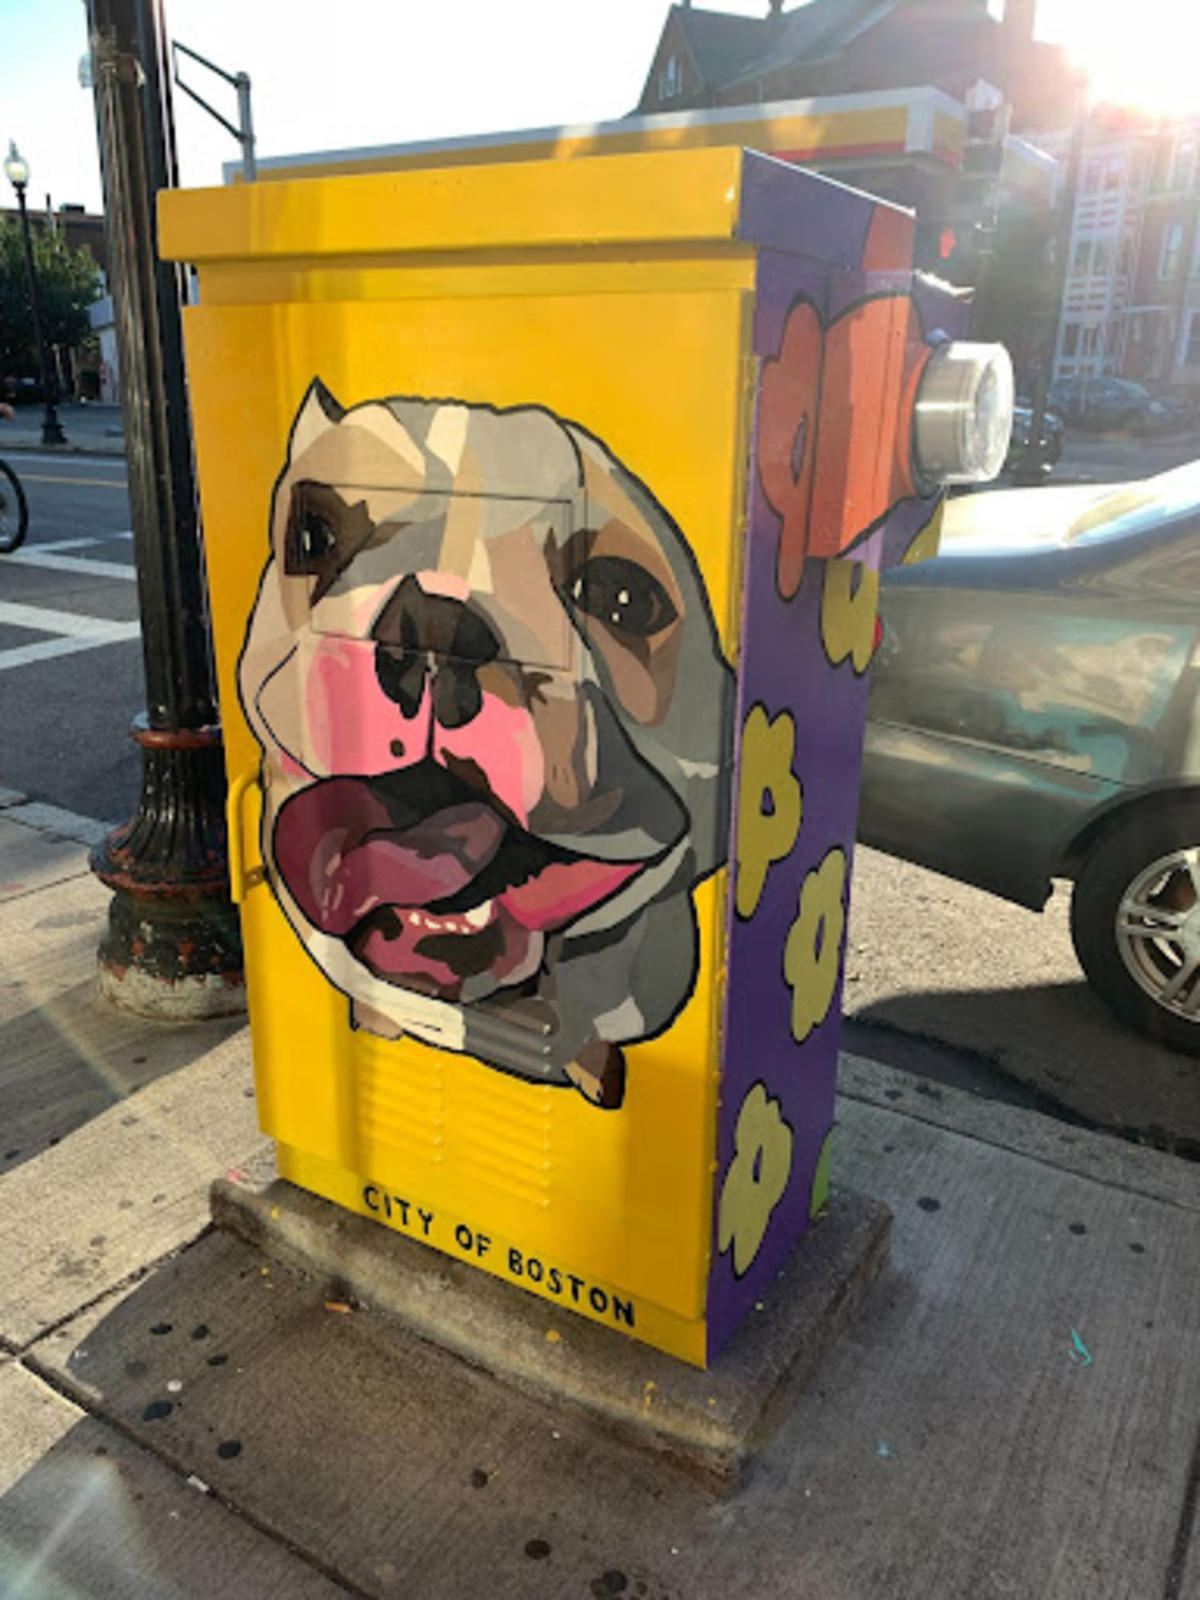 Yellow PaintBox with image of Dog in the center by Emma Tavolieri